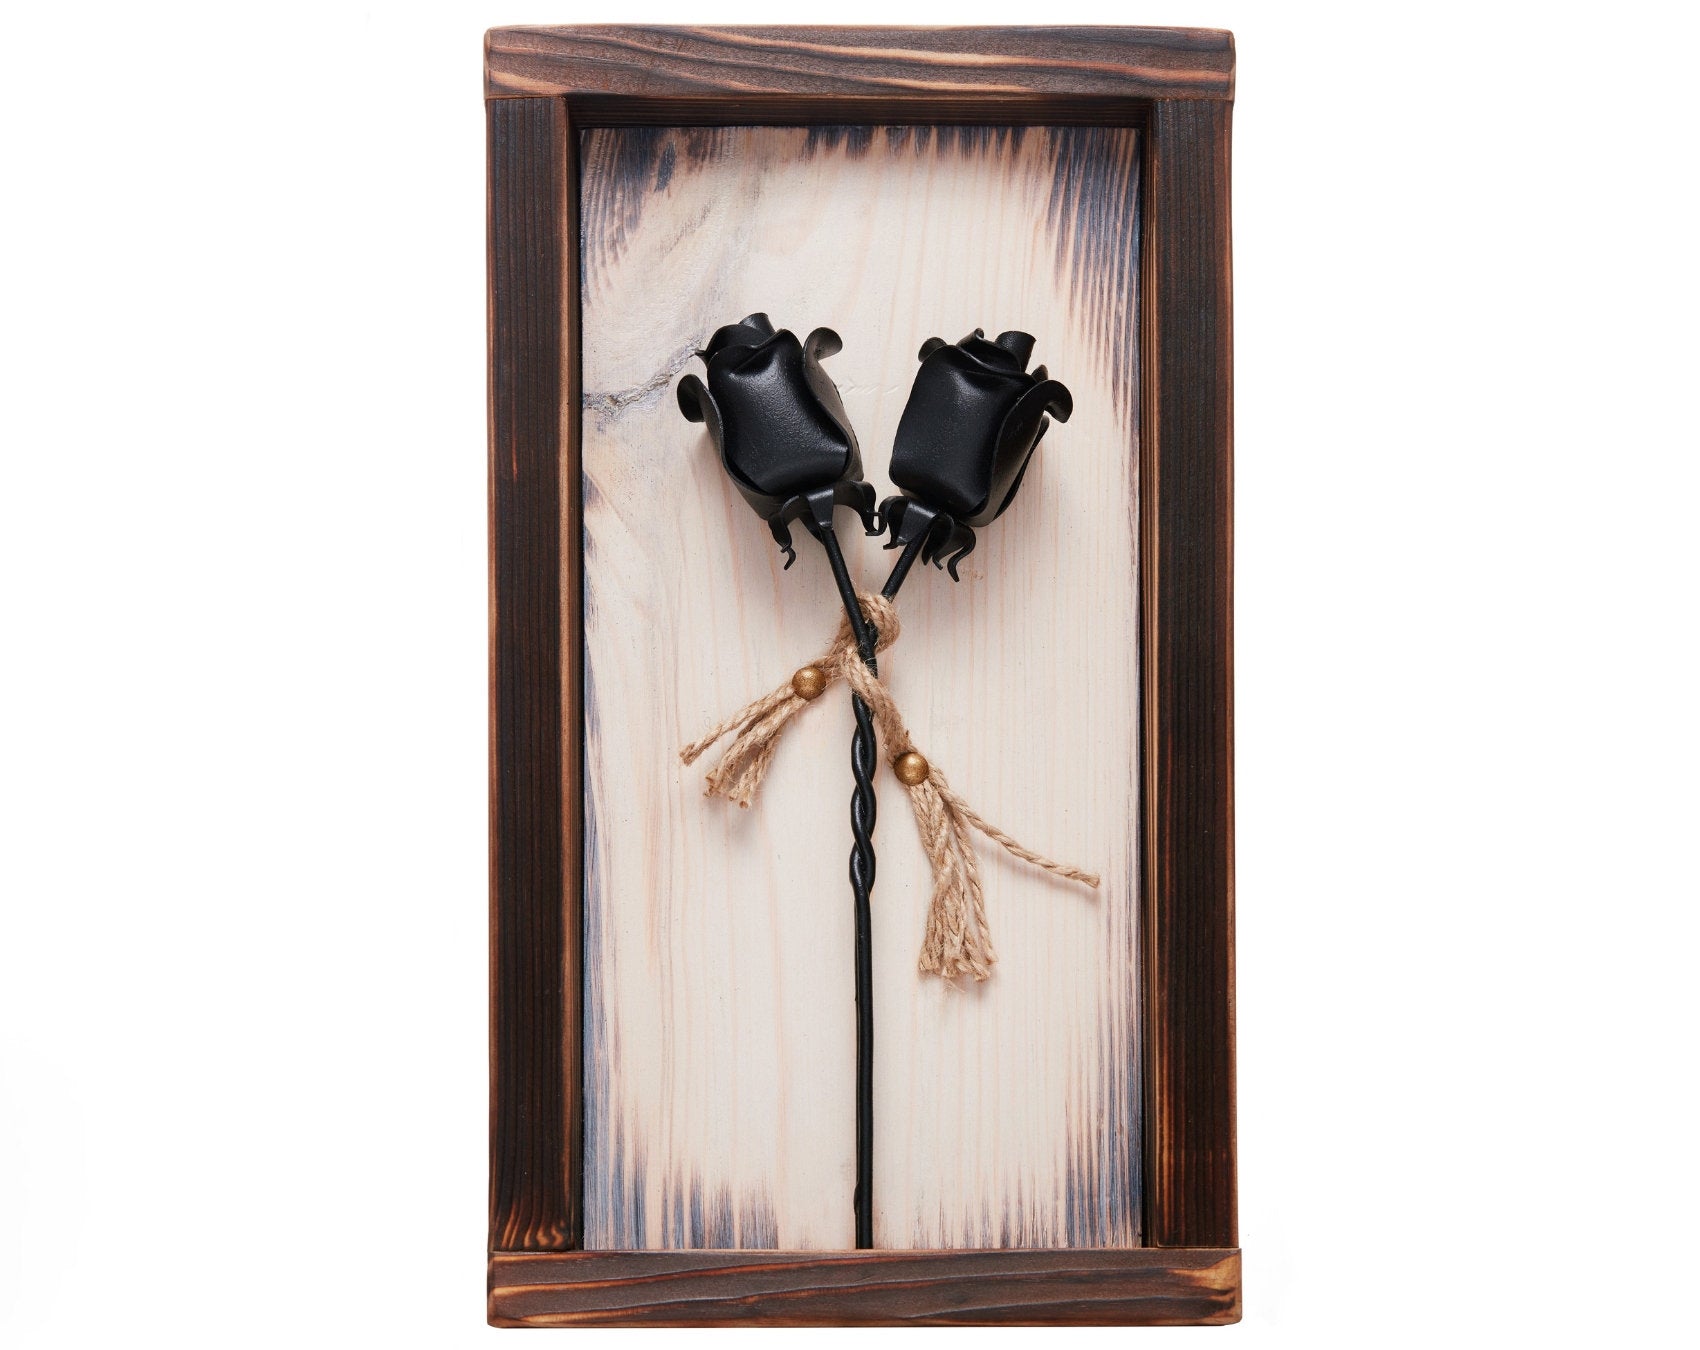 Forged Twisted 2 Iron Roses In Wooden Frame. Beautiful And Stylish 3D Effect Gift For Her Anniversary With Deep Message